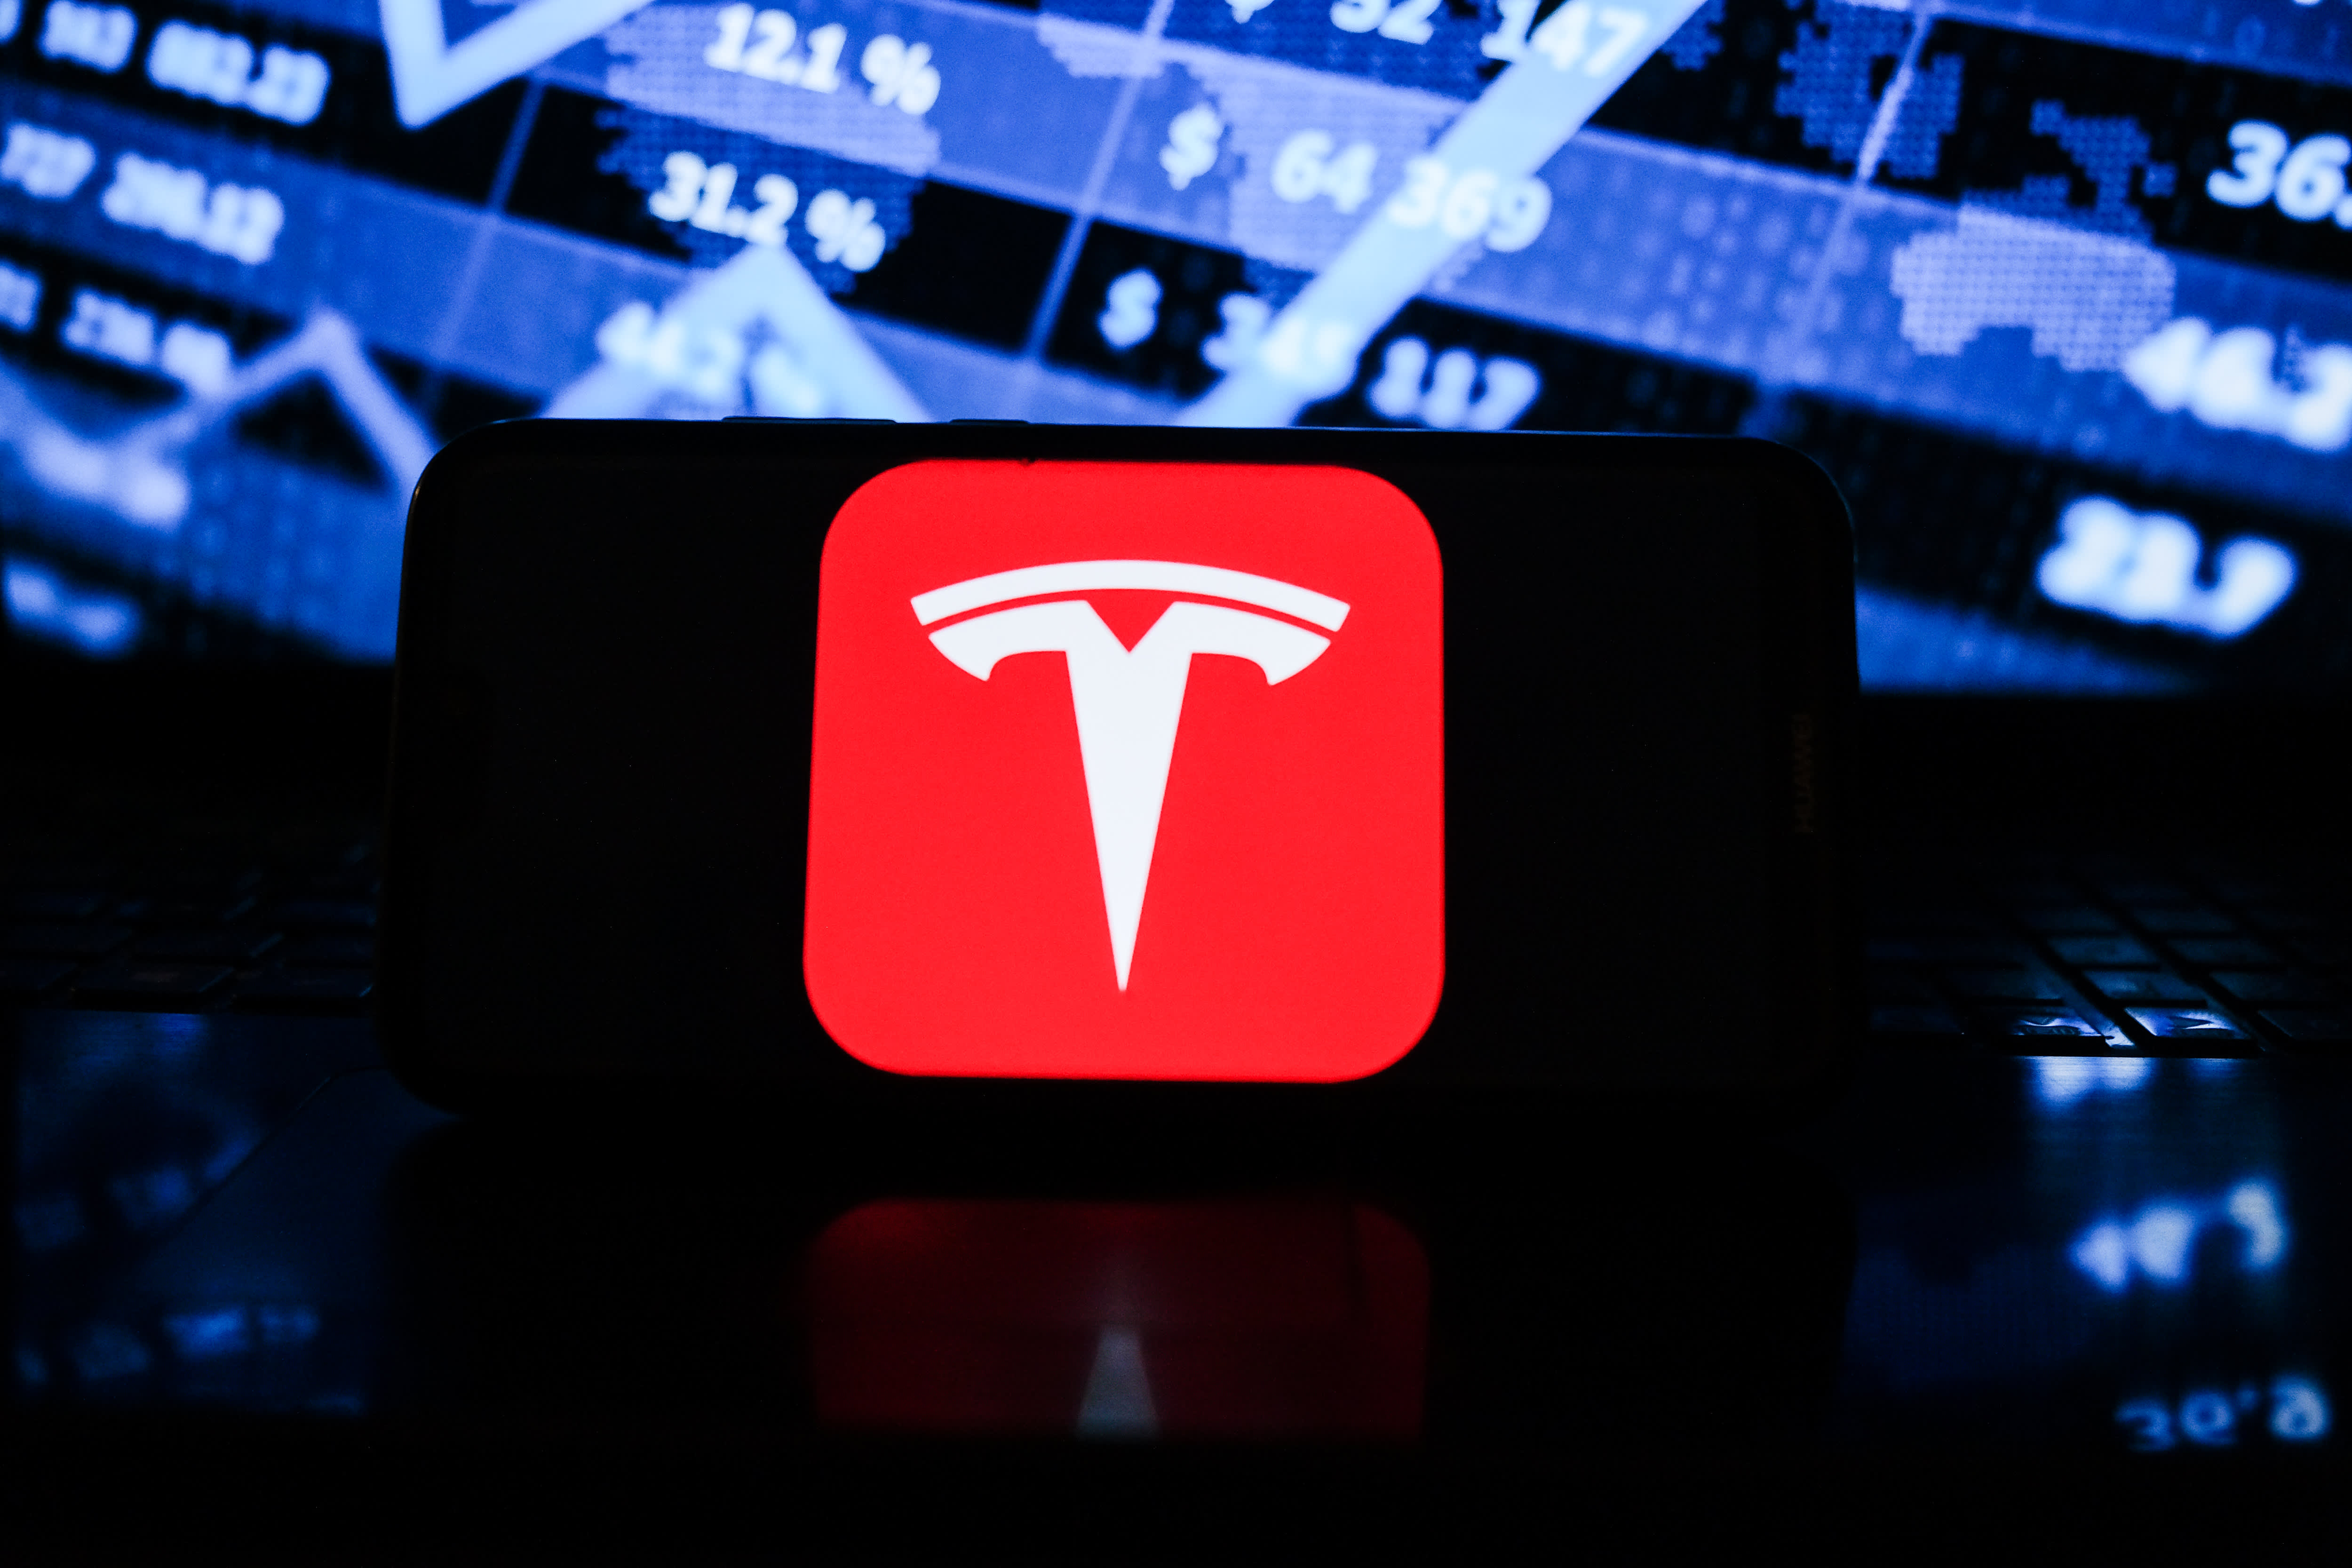 Cramer says Tesla is a phenomenon that seems to ‘go up endlessly on nothing’ Auto Recent